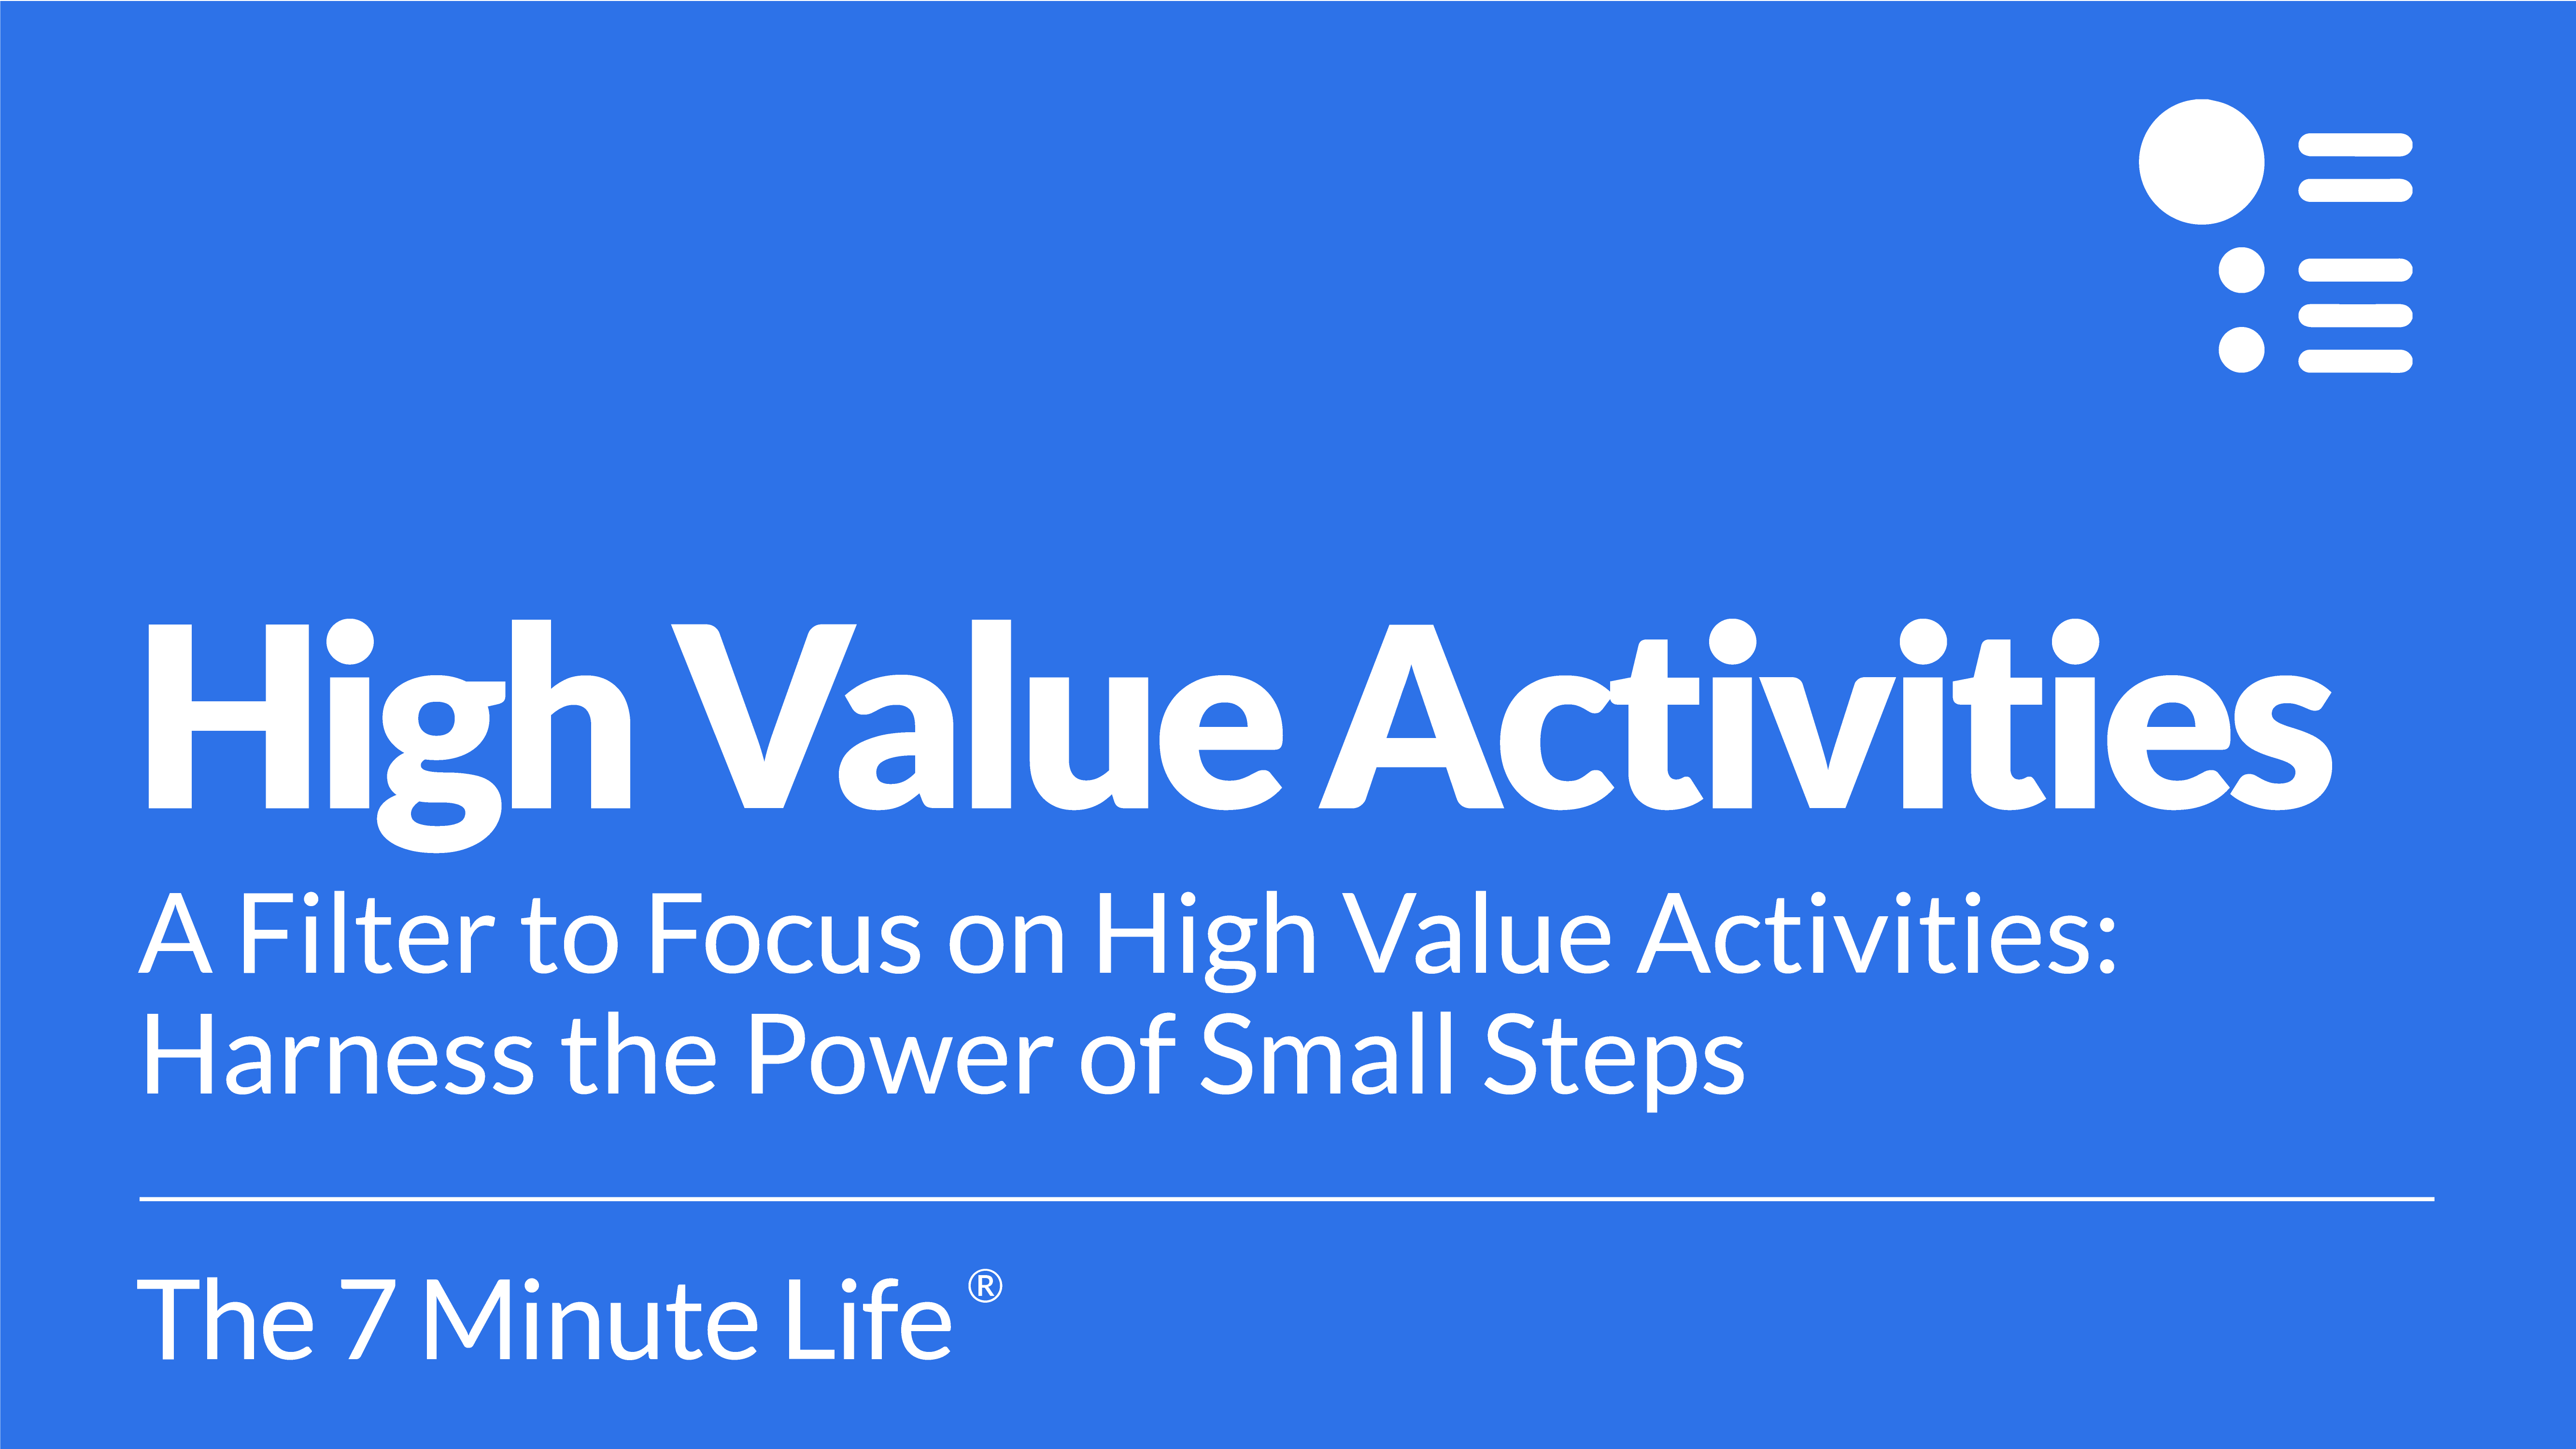 A Filter to Focus on High-Value Activities